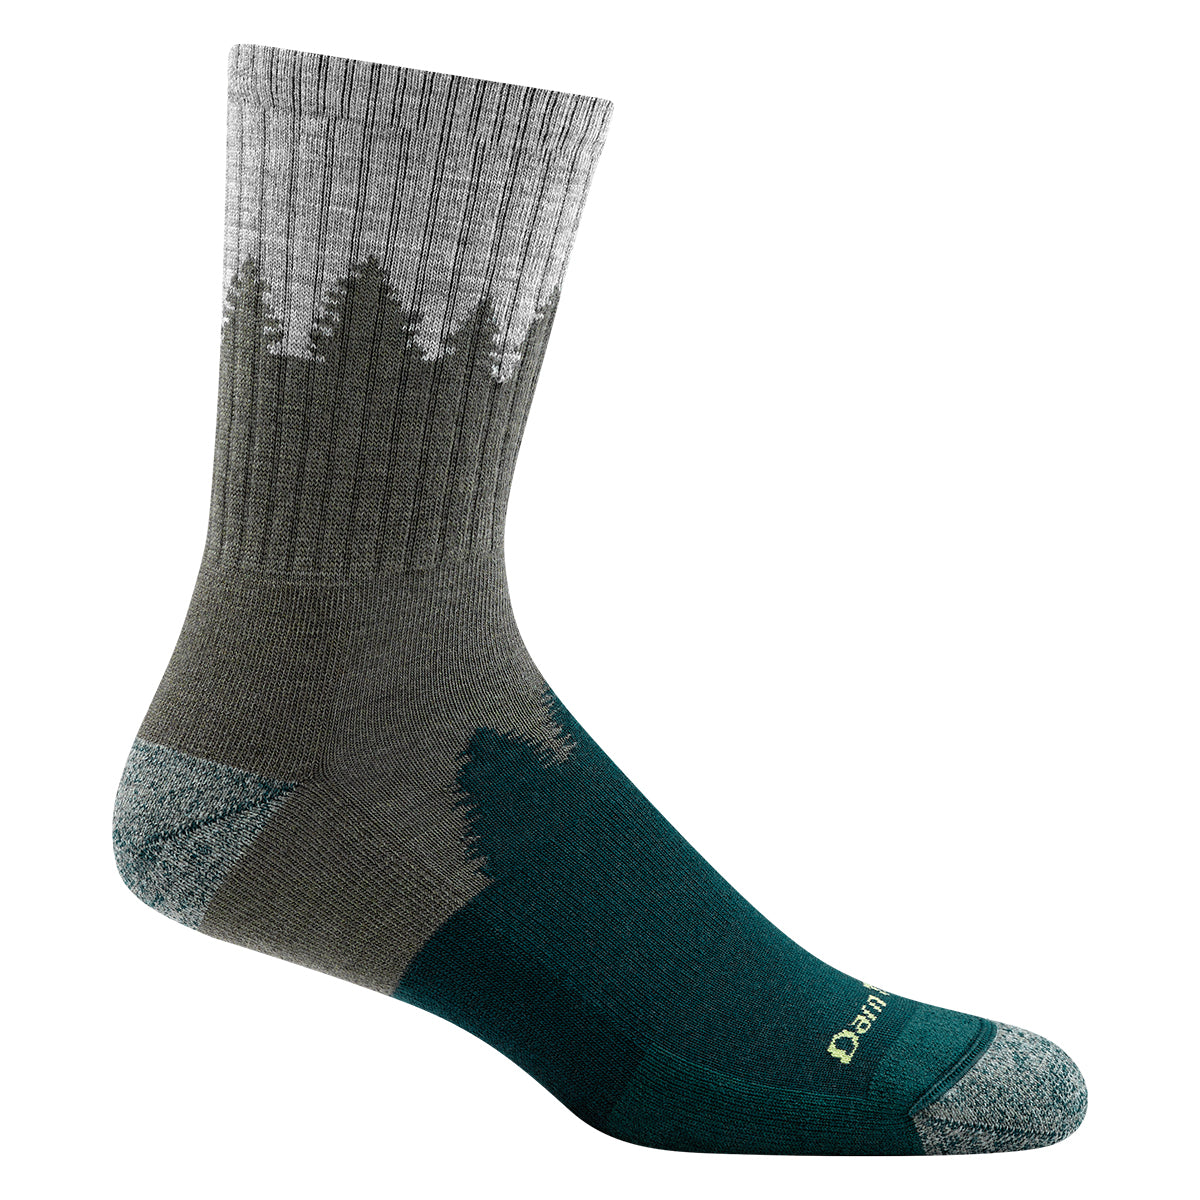 A single gray and teal Darn Tough Number 2 Green Crew men&#39;s hiking sock made of merino wool displayed against a white background.